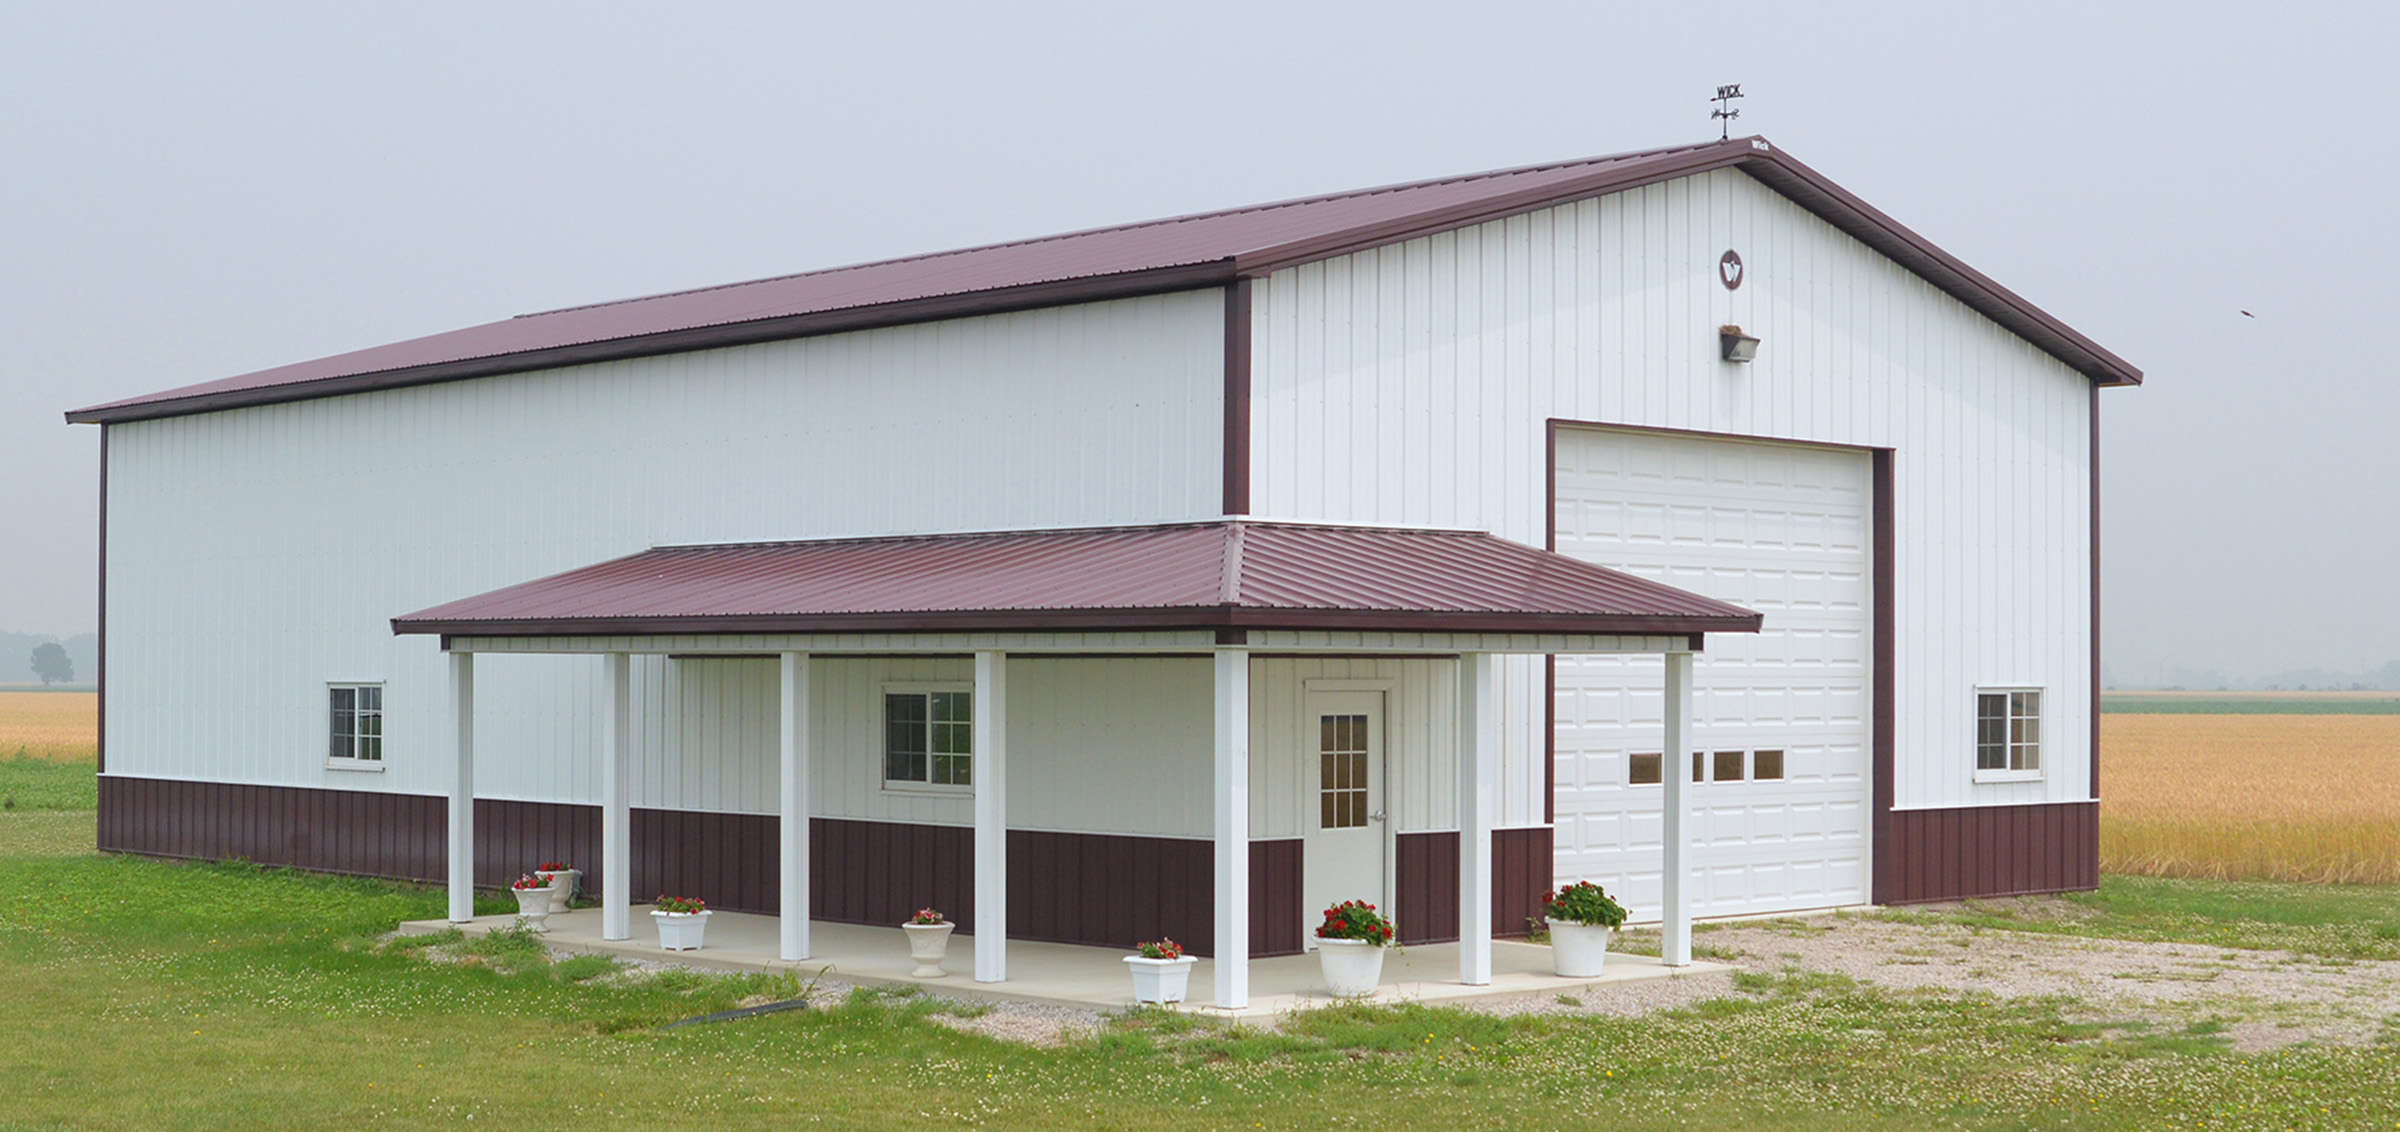 Maroon and white post frame suburban building